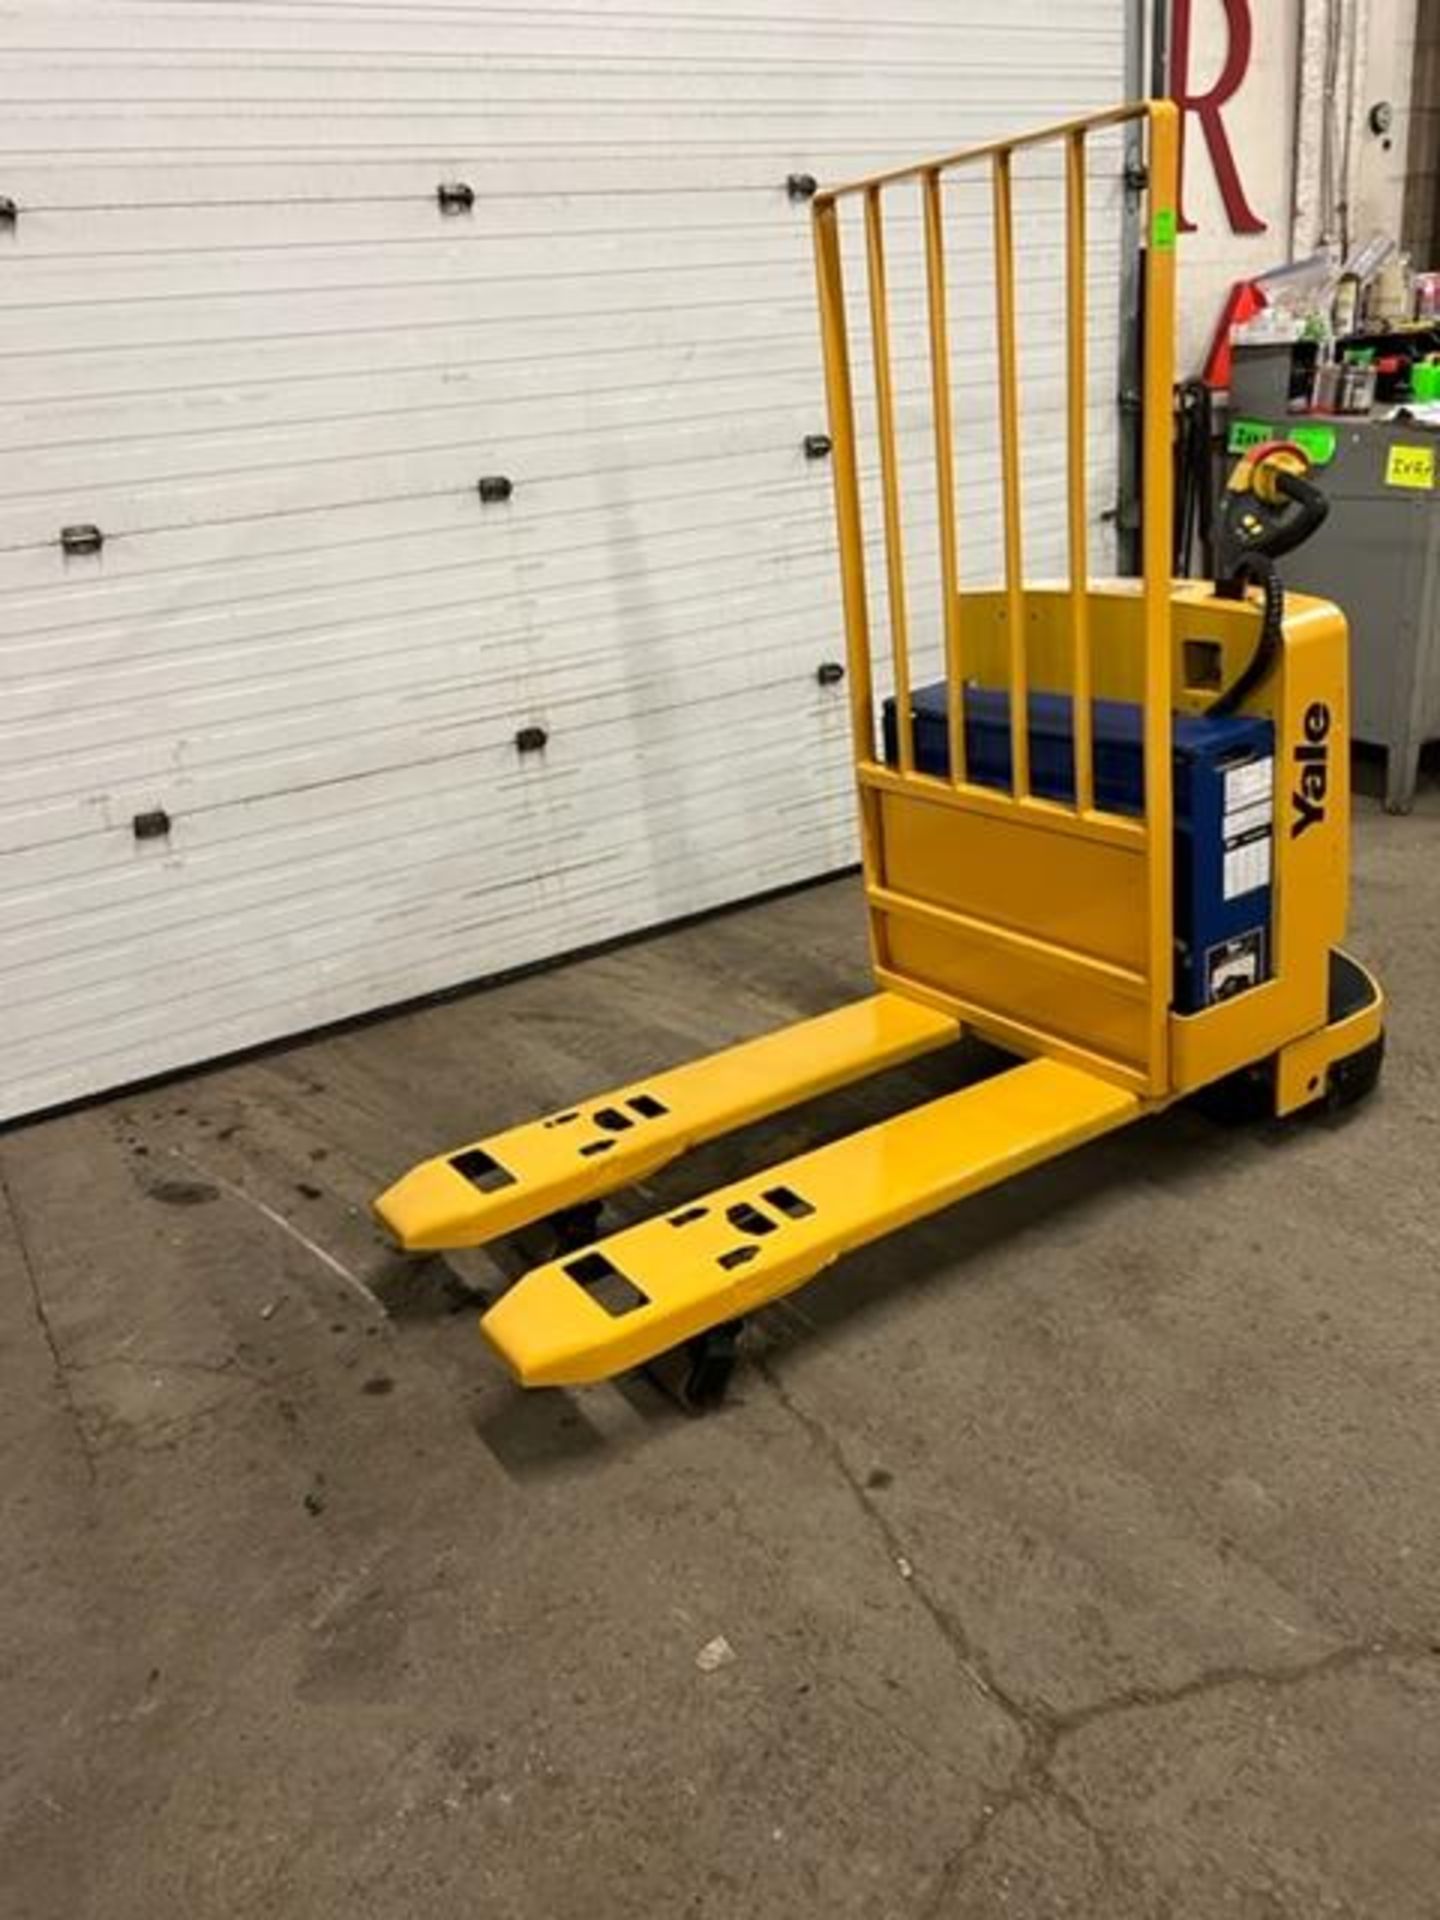 2008 Yale Walk Behind Walkie 6500lbs capacity Powered Pallet Cart Lift NICE UNIT with LOW HOURS